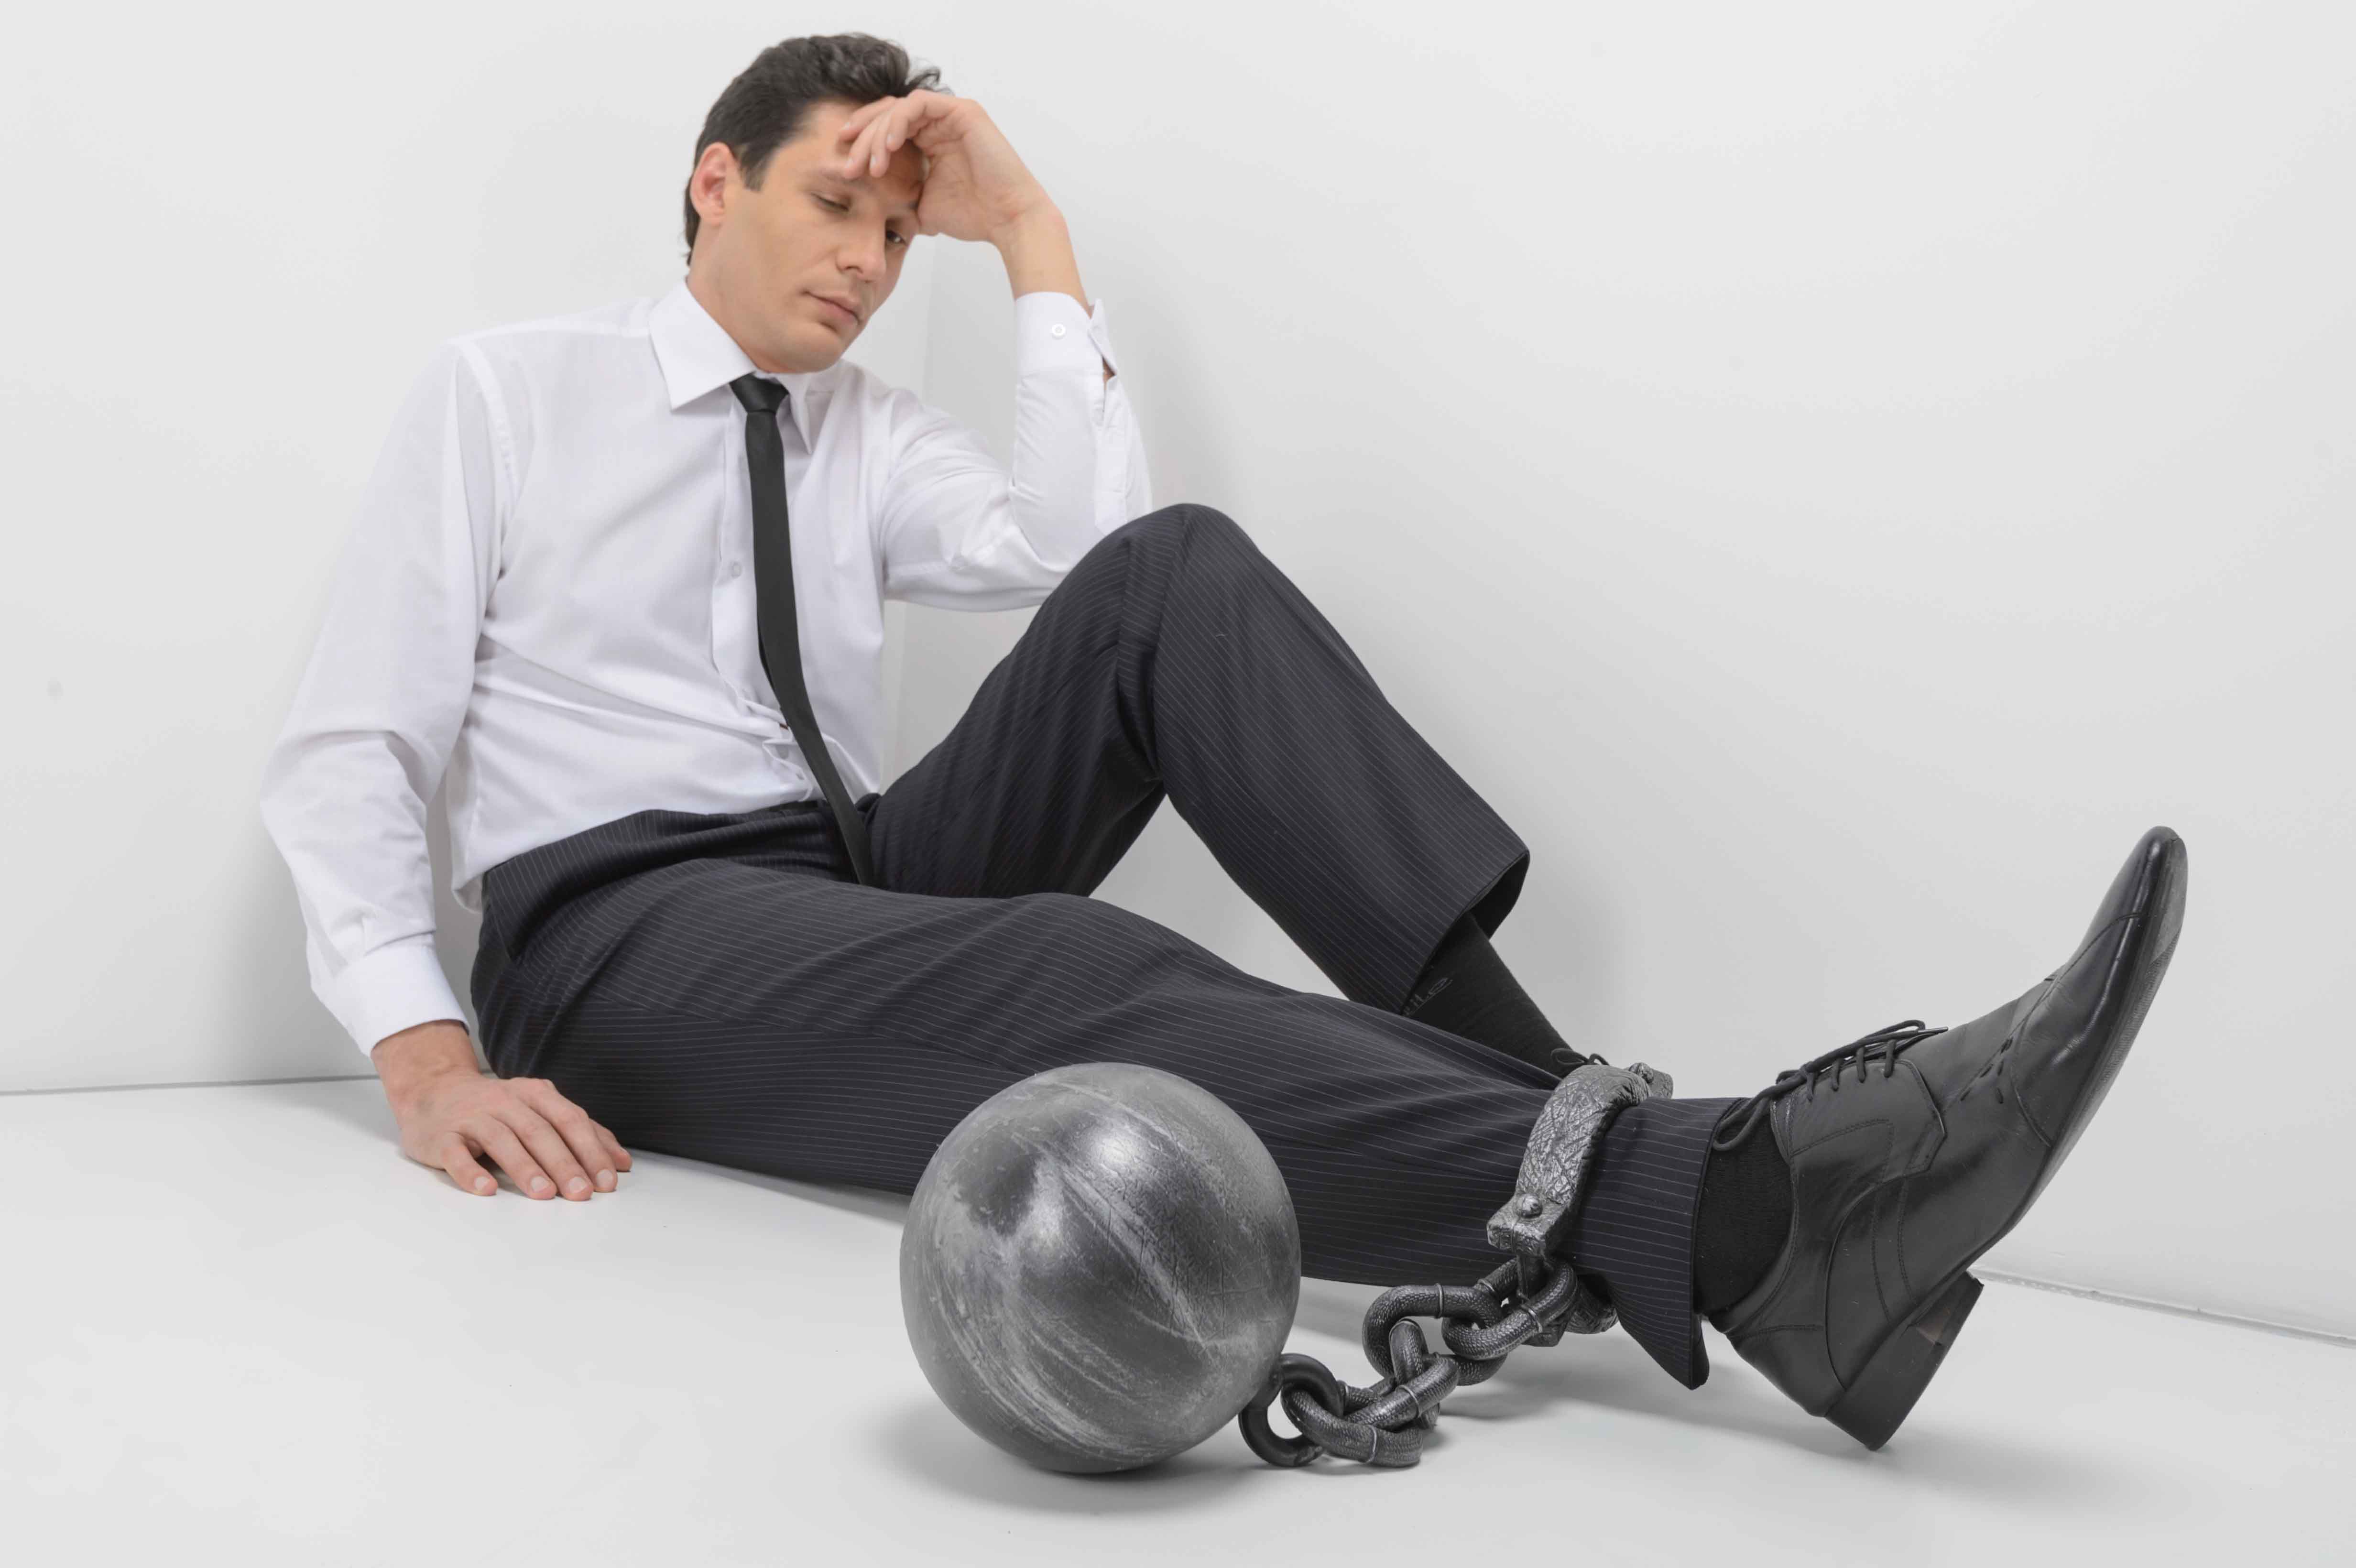 lowres_ball_and_chain_free_stress_shutterstock_146076278.jpg